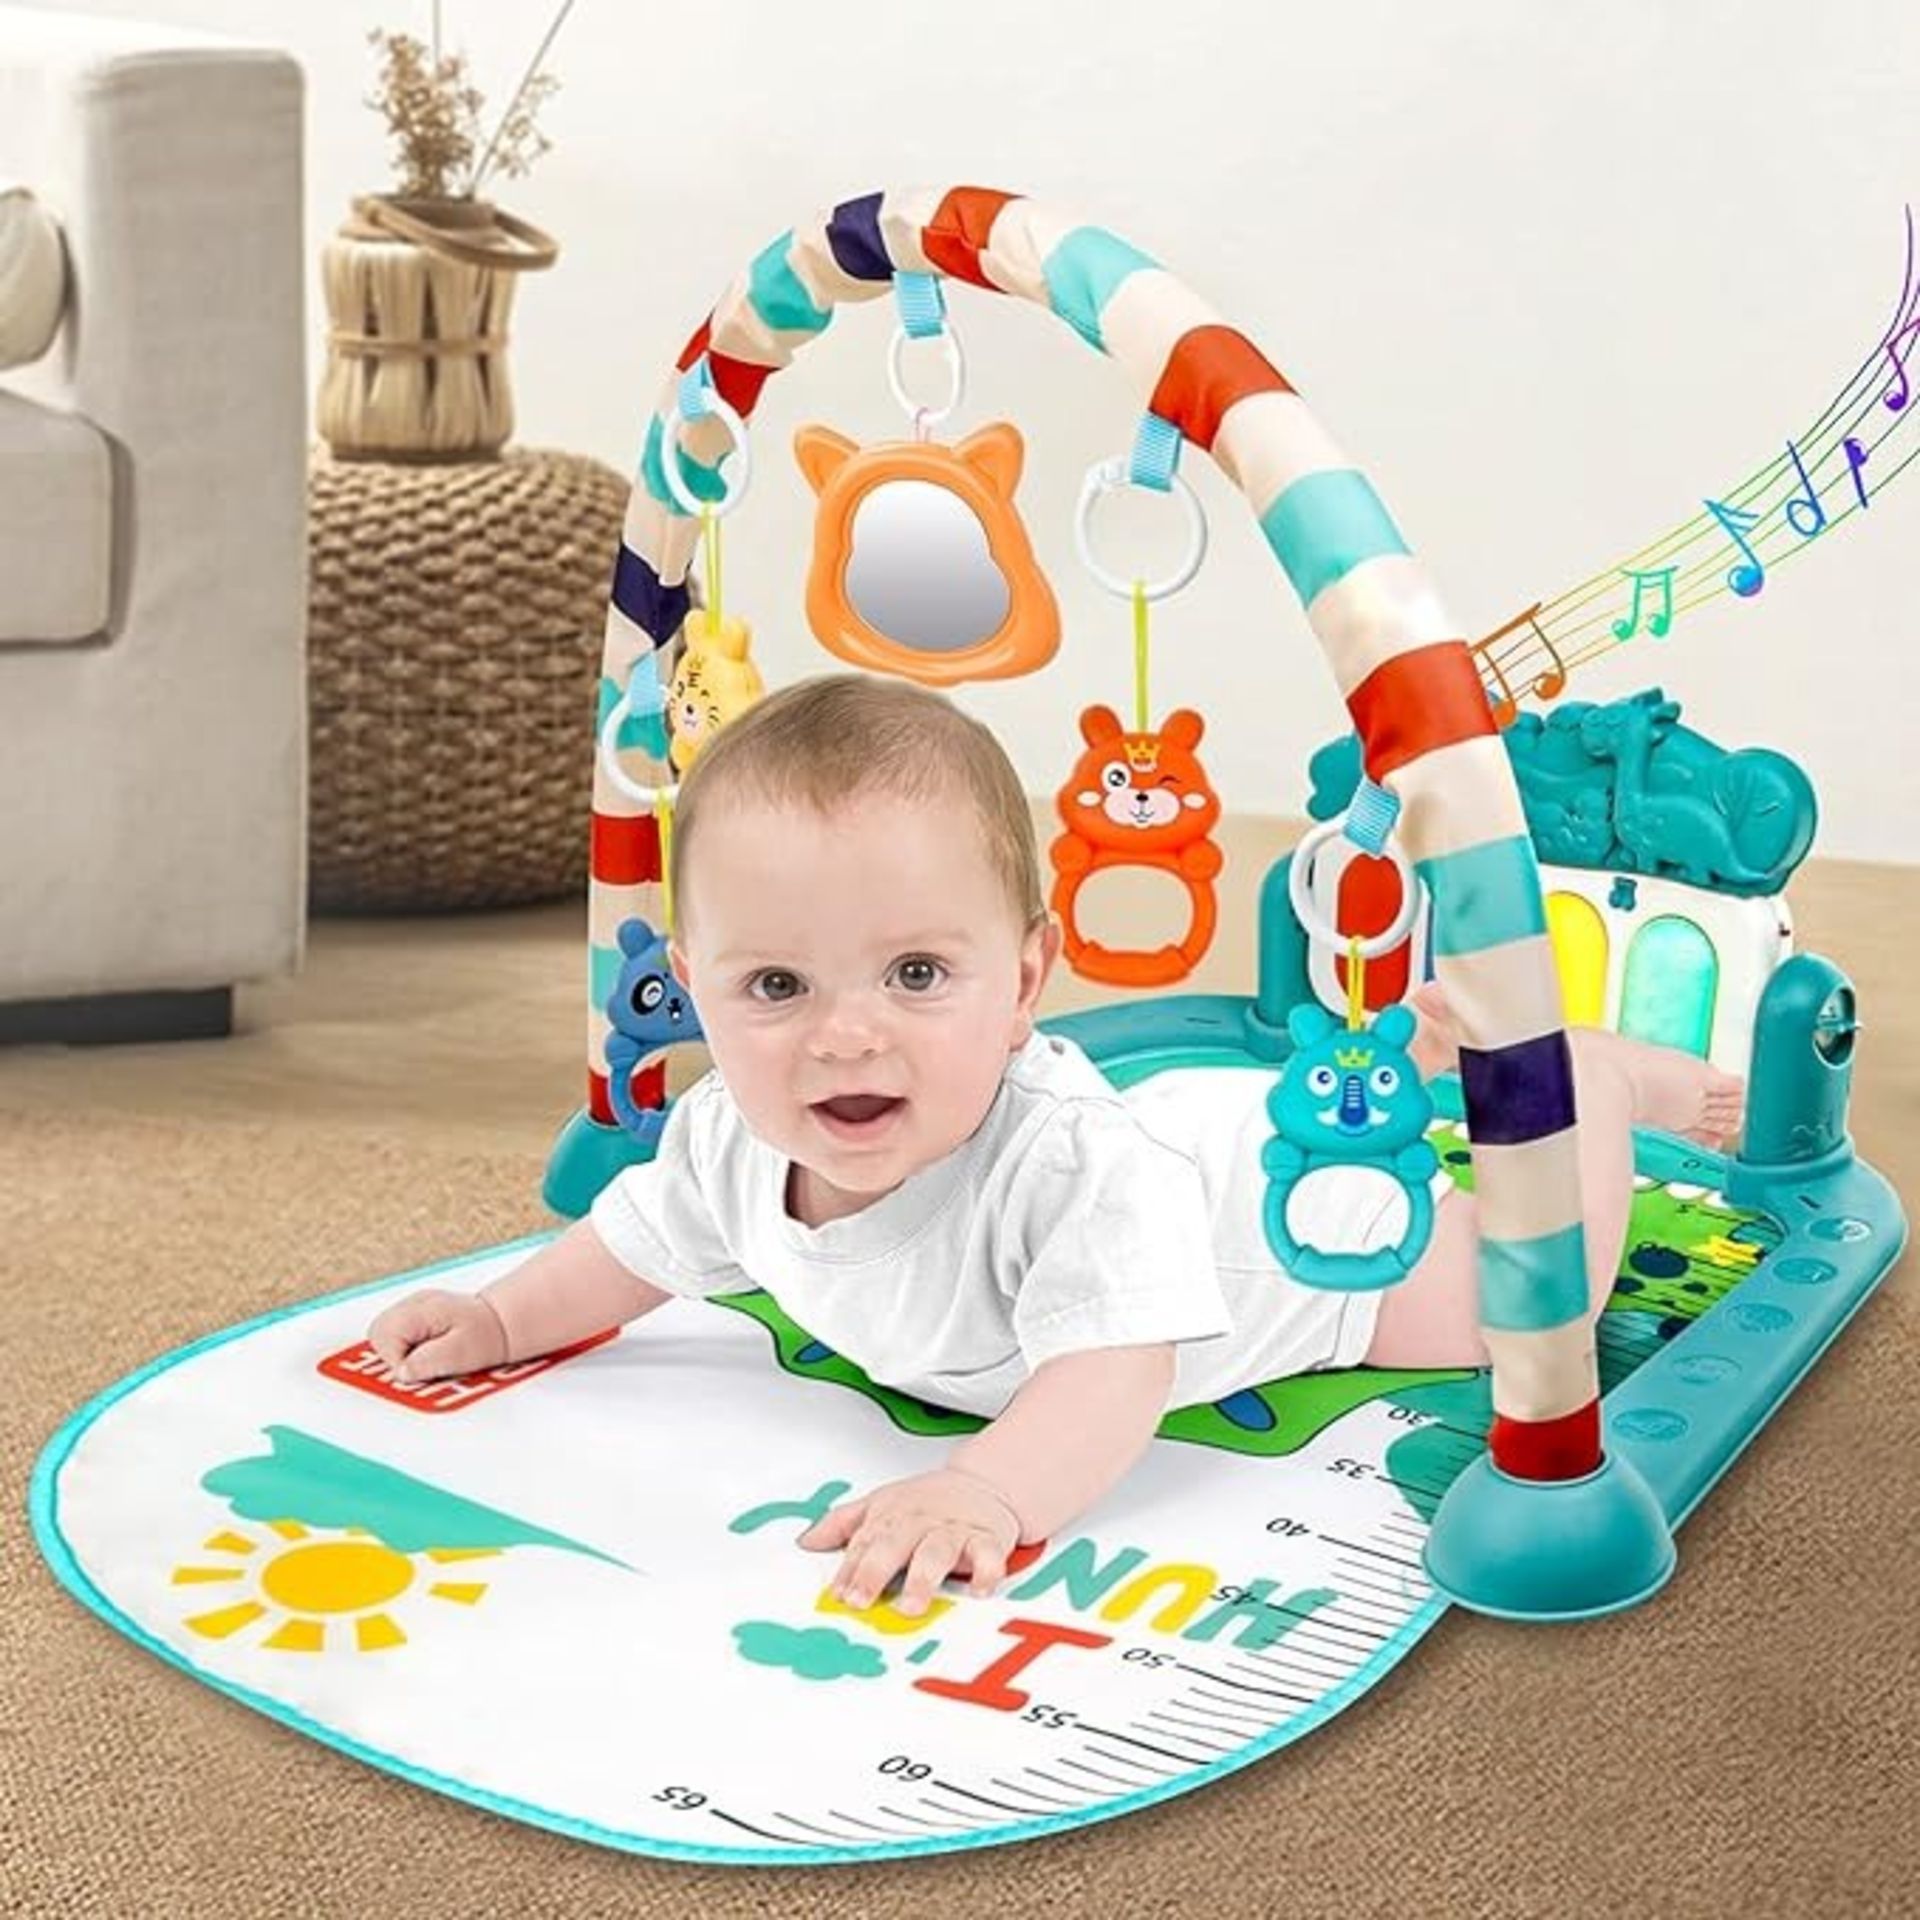 Baby Play Mat with Music and Lights, Play Piano Gym, Early Development Activity Baby Play - ER53 *